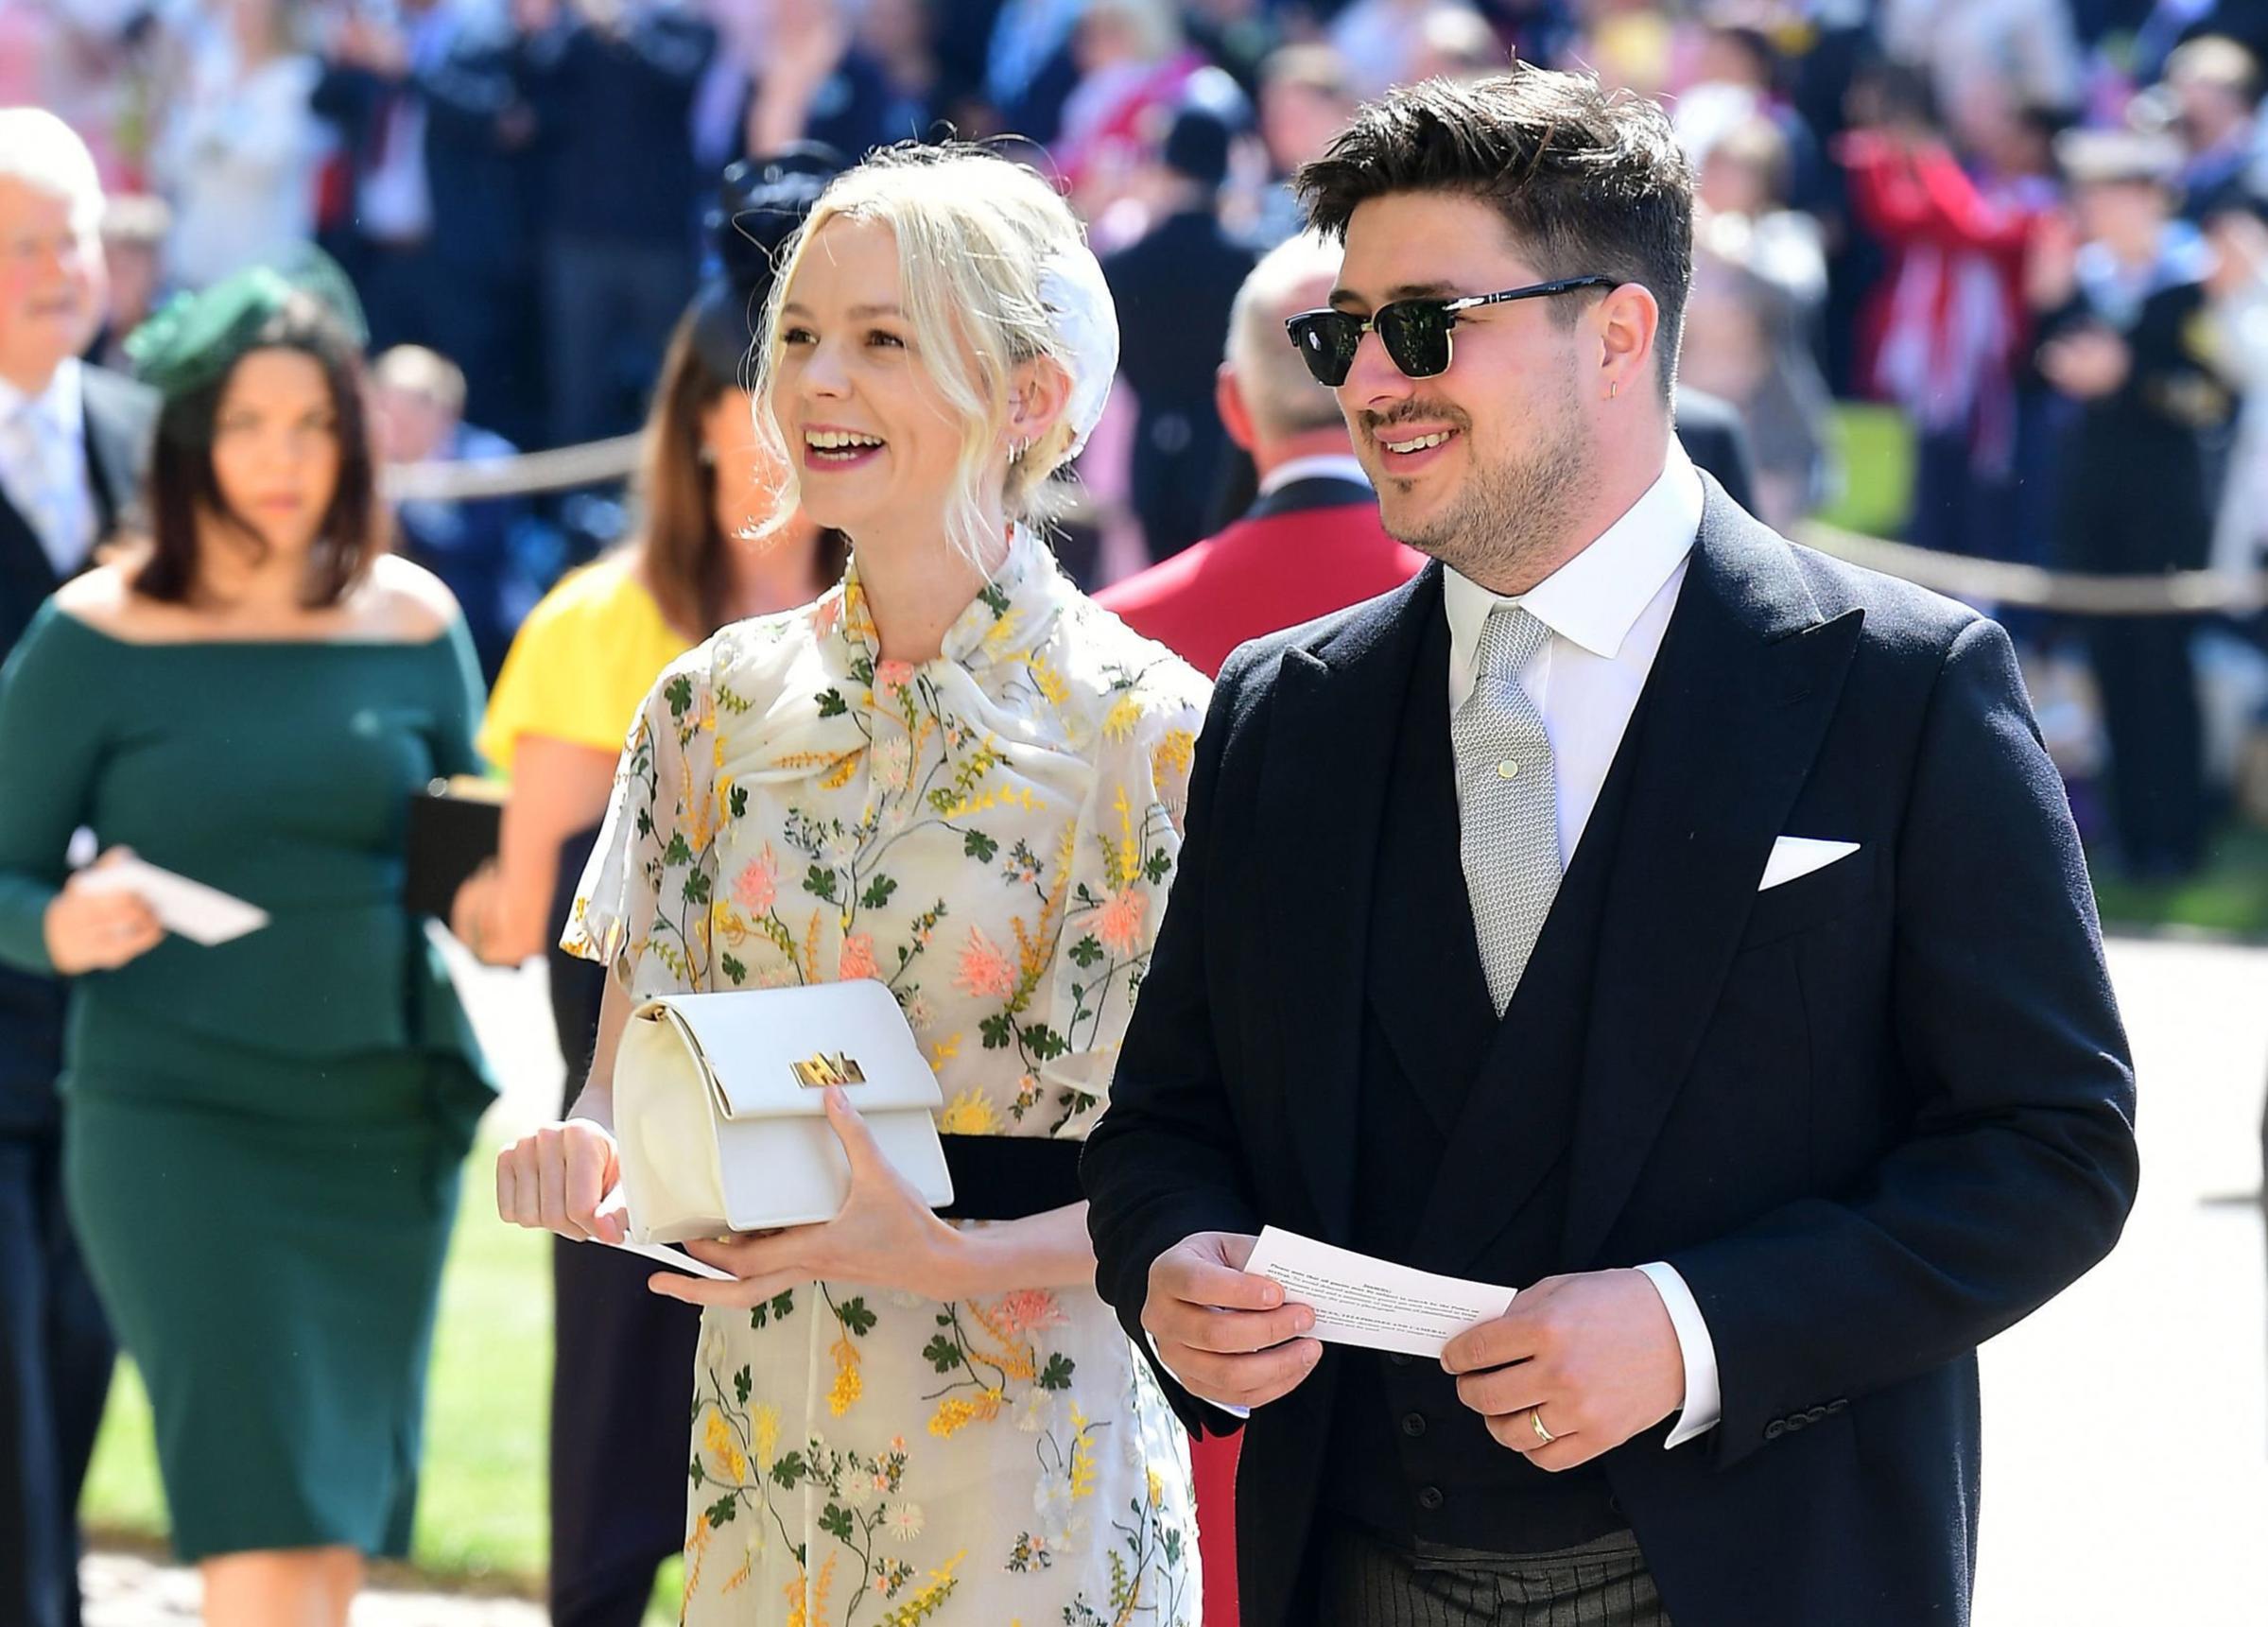 British musician Marcus Mumford and British actor Carey Mulligan arrive for the wedding ceremony of Britain's Prince Harry, Duke of Sussex and Meghan Markle at St George's Chapel, Windsor Castle, in Windsor, on May 19, 2018.